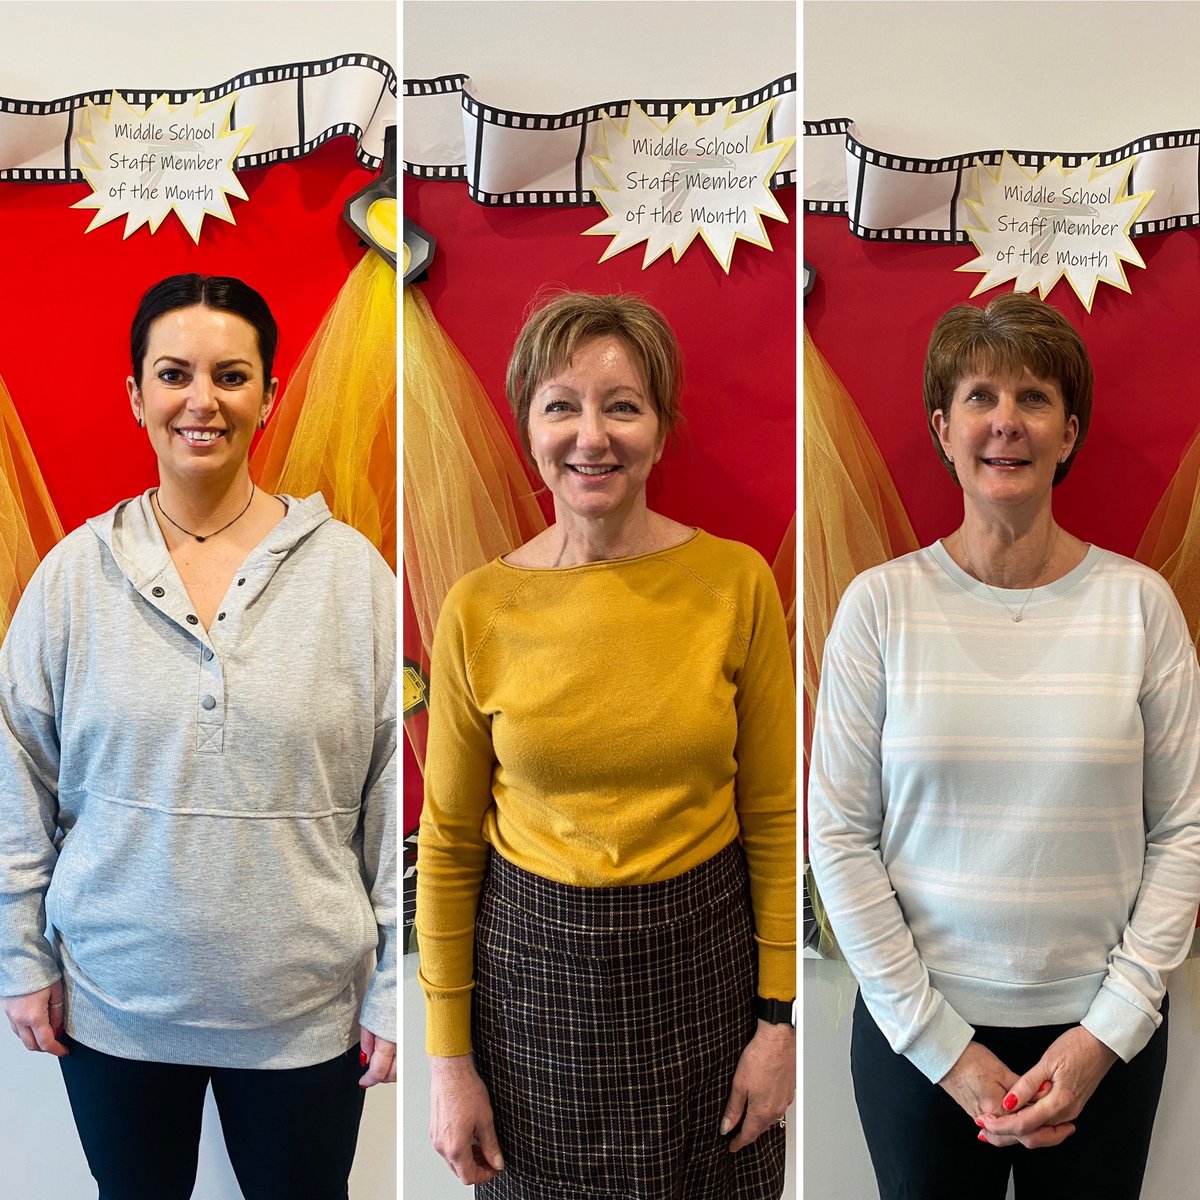 Congratulations to our February MS Staff Members of the Month. Mrs. Chelsea Dembinski-Health Para, Mrs. Julia Reddel-7th Grade ELA, and Mrs. Siekman-7th/8th Grade Science. Thank you for all of your hard work and efforts! 🔴⚪️⚫️
#TheFalconWay #dcwestpride